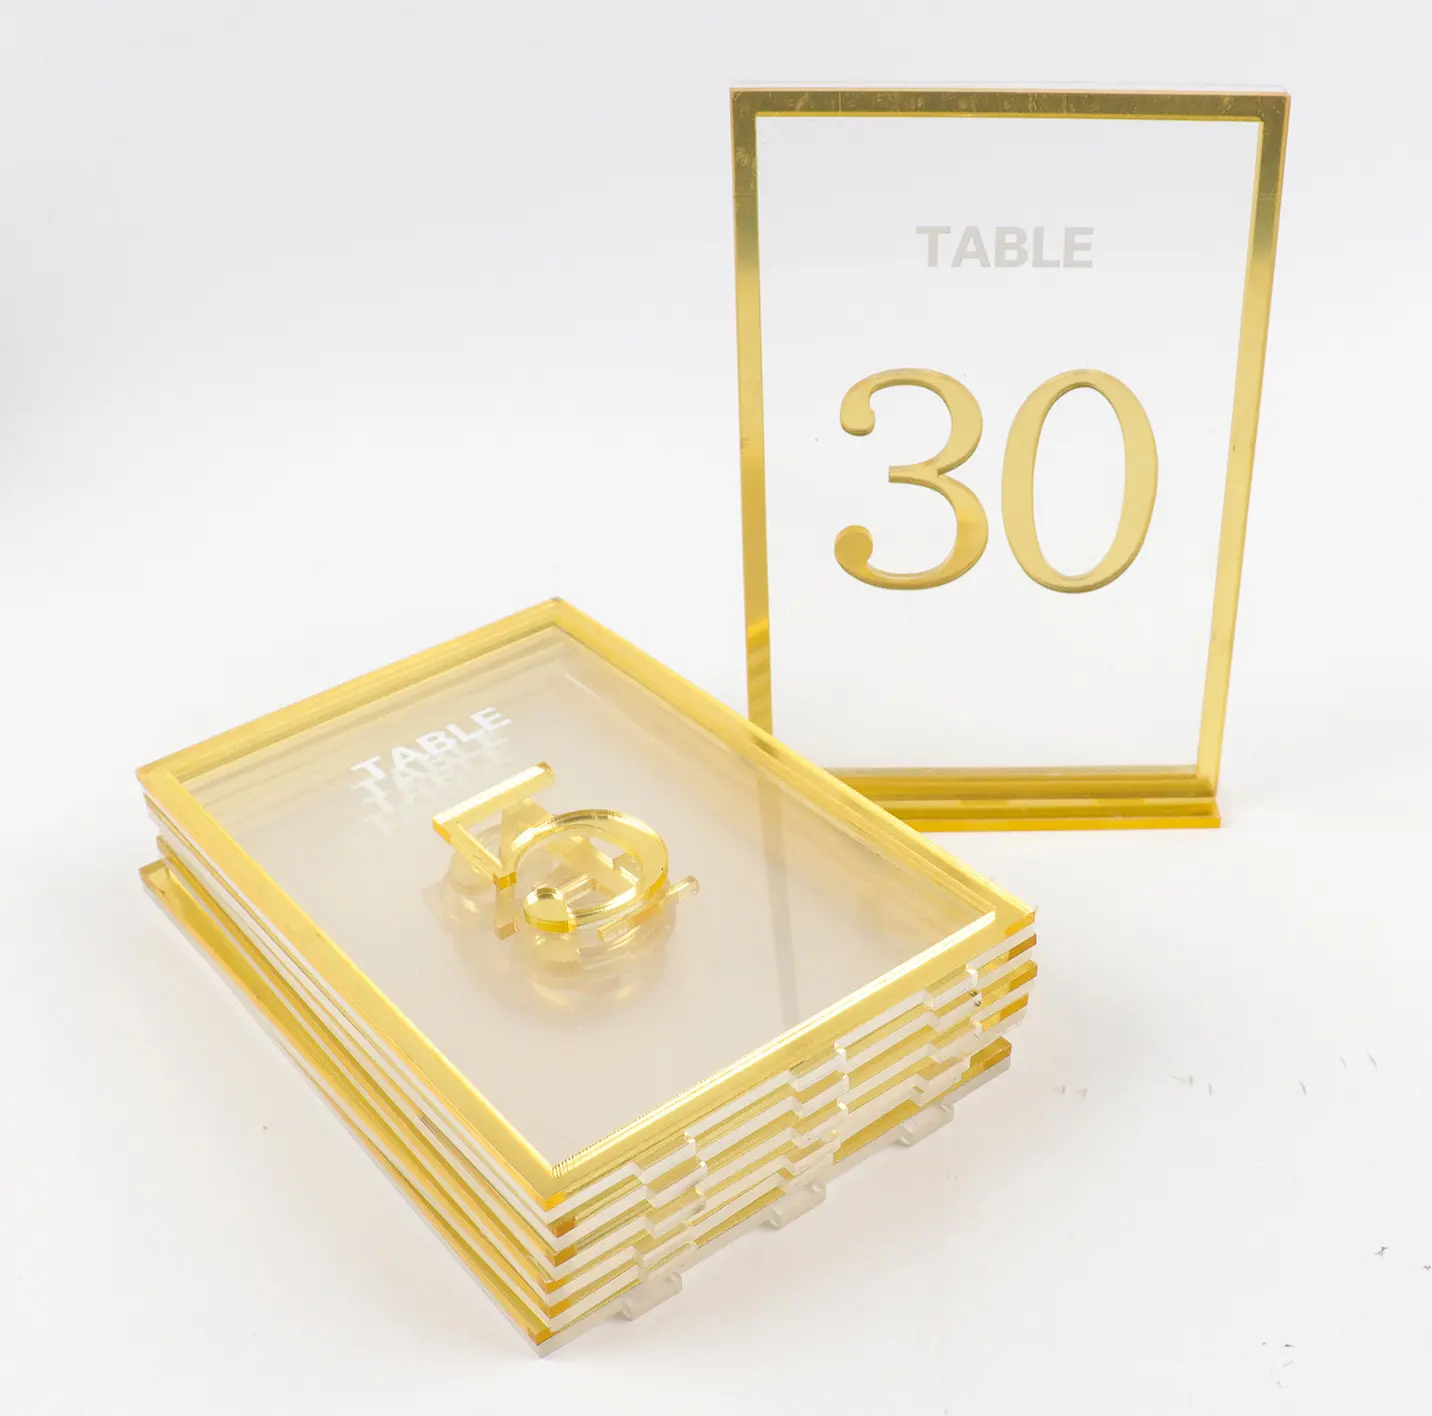 High Quality Laser Cut Gold Framed Acrylic Table Numbers With Stand Wedding Centerpieces Table Decoration